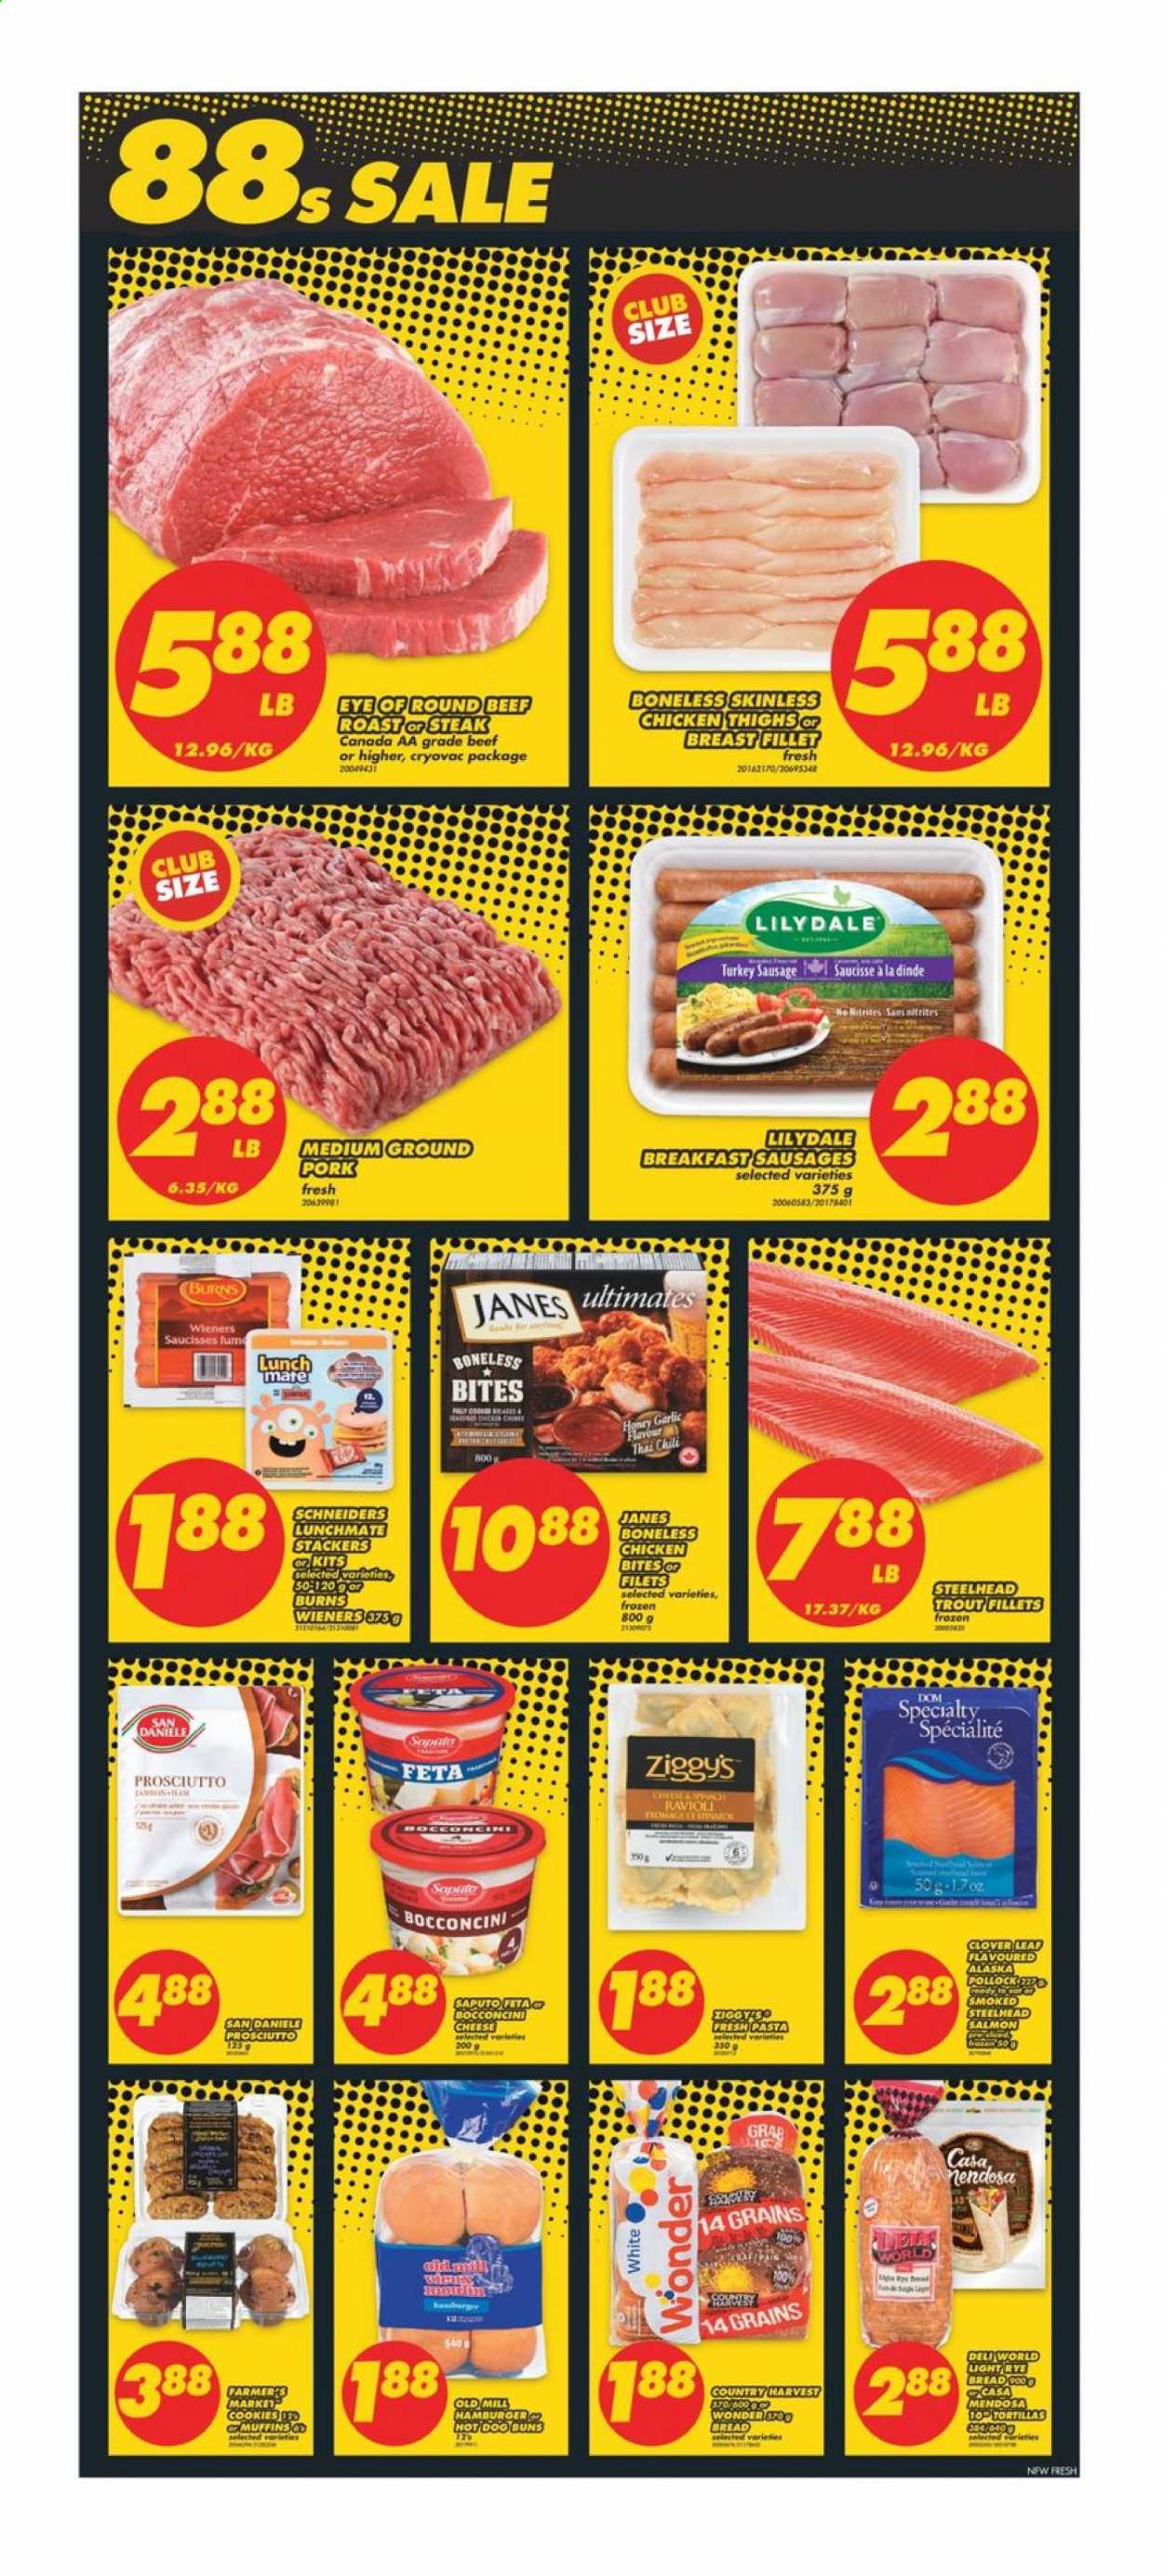 thumbnail - No Frills Flyer - January 15, 2021 - January 21, 2021 - Sales products - bread, buns, garlic, trout, pollock, ravioli, hamburger, prosciutto, sausage, bocconcini, cheese, feta, Clover, Country Harvest, chicken bites, cookies, honey, chicken thighs, chicken, beef meat, eye of round, roast beef, ground pork, steak. Page 4.